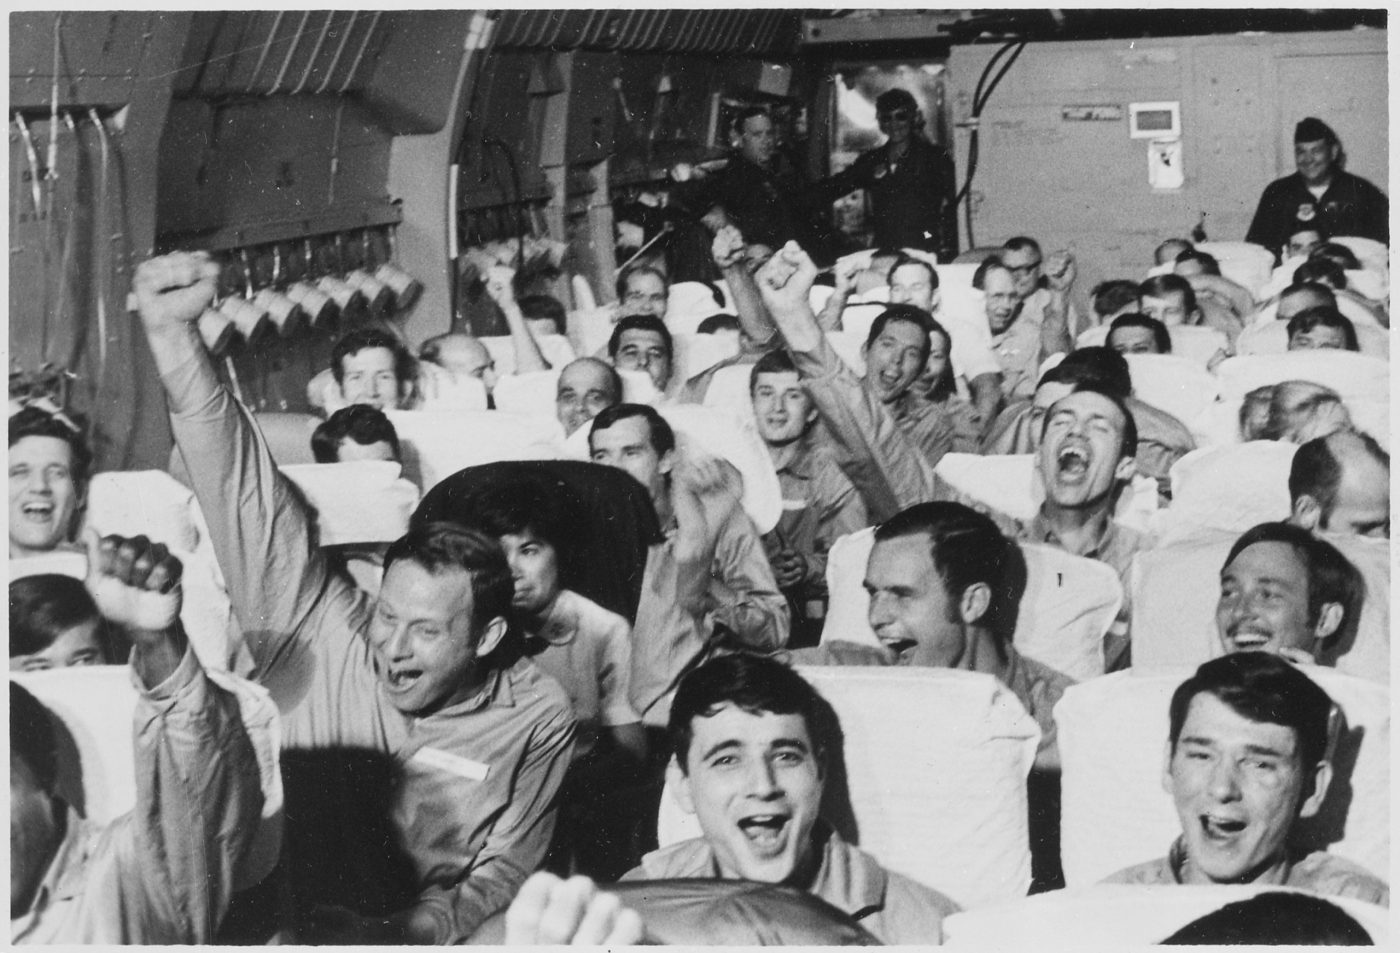 Americans raise their arms in jubilation as their military transport takes off from Hanoi on March 28, 1973, following their release from captivity at the end of the Vietnam War. During and after the war, Congress made it easier for former prisoners to qualify for compensation and medical treatment. (National Archives).